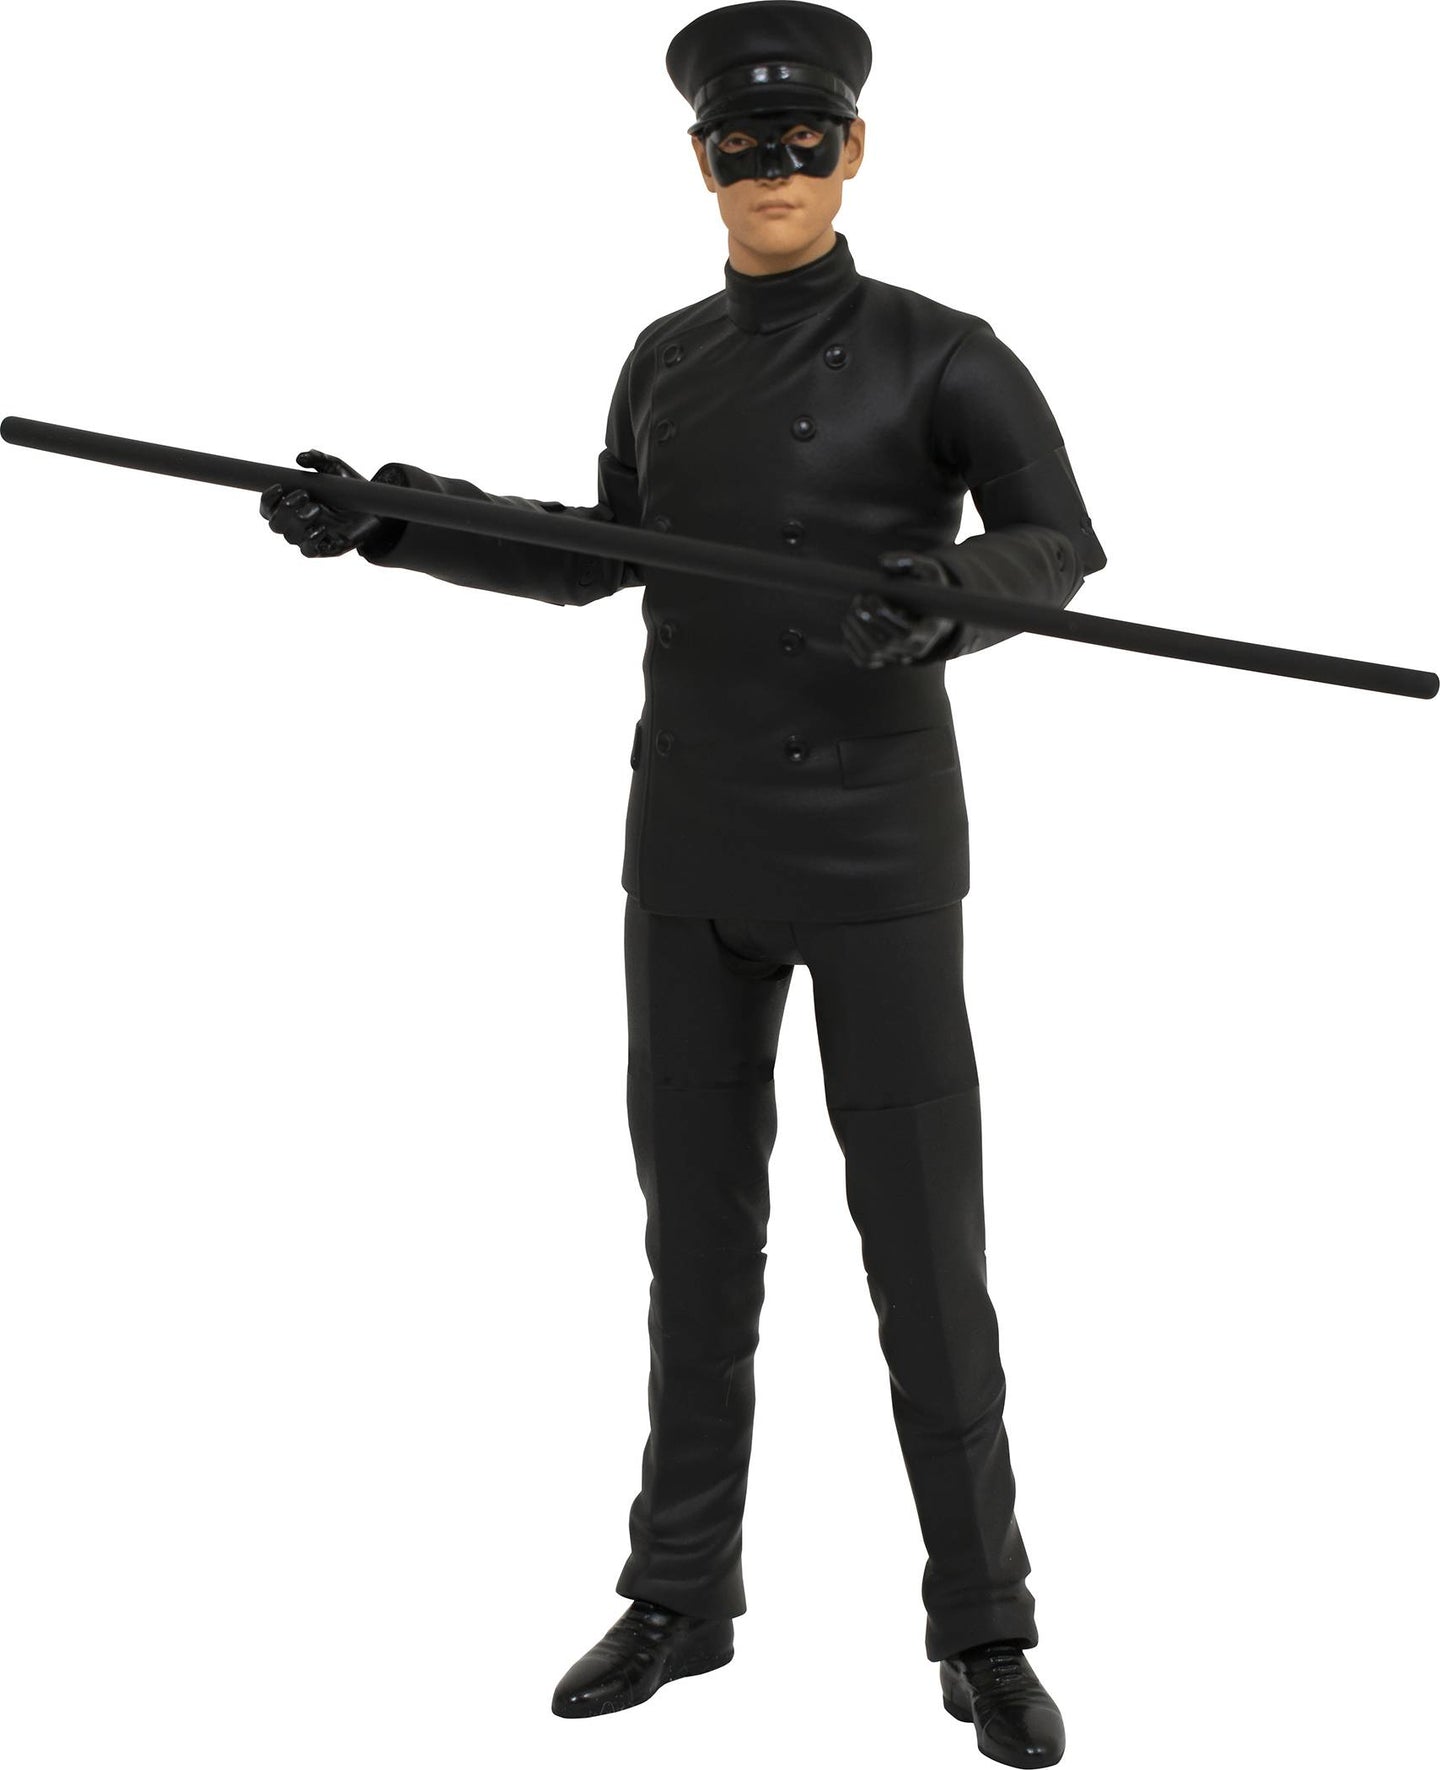 Green Hornet Deluxe Kato 7 Inch Action Figure with 16 points of articulation